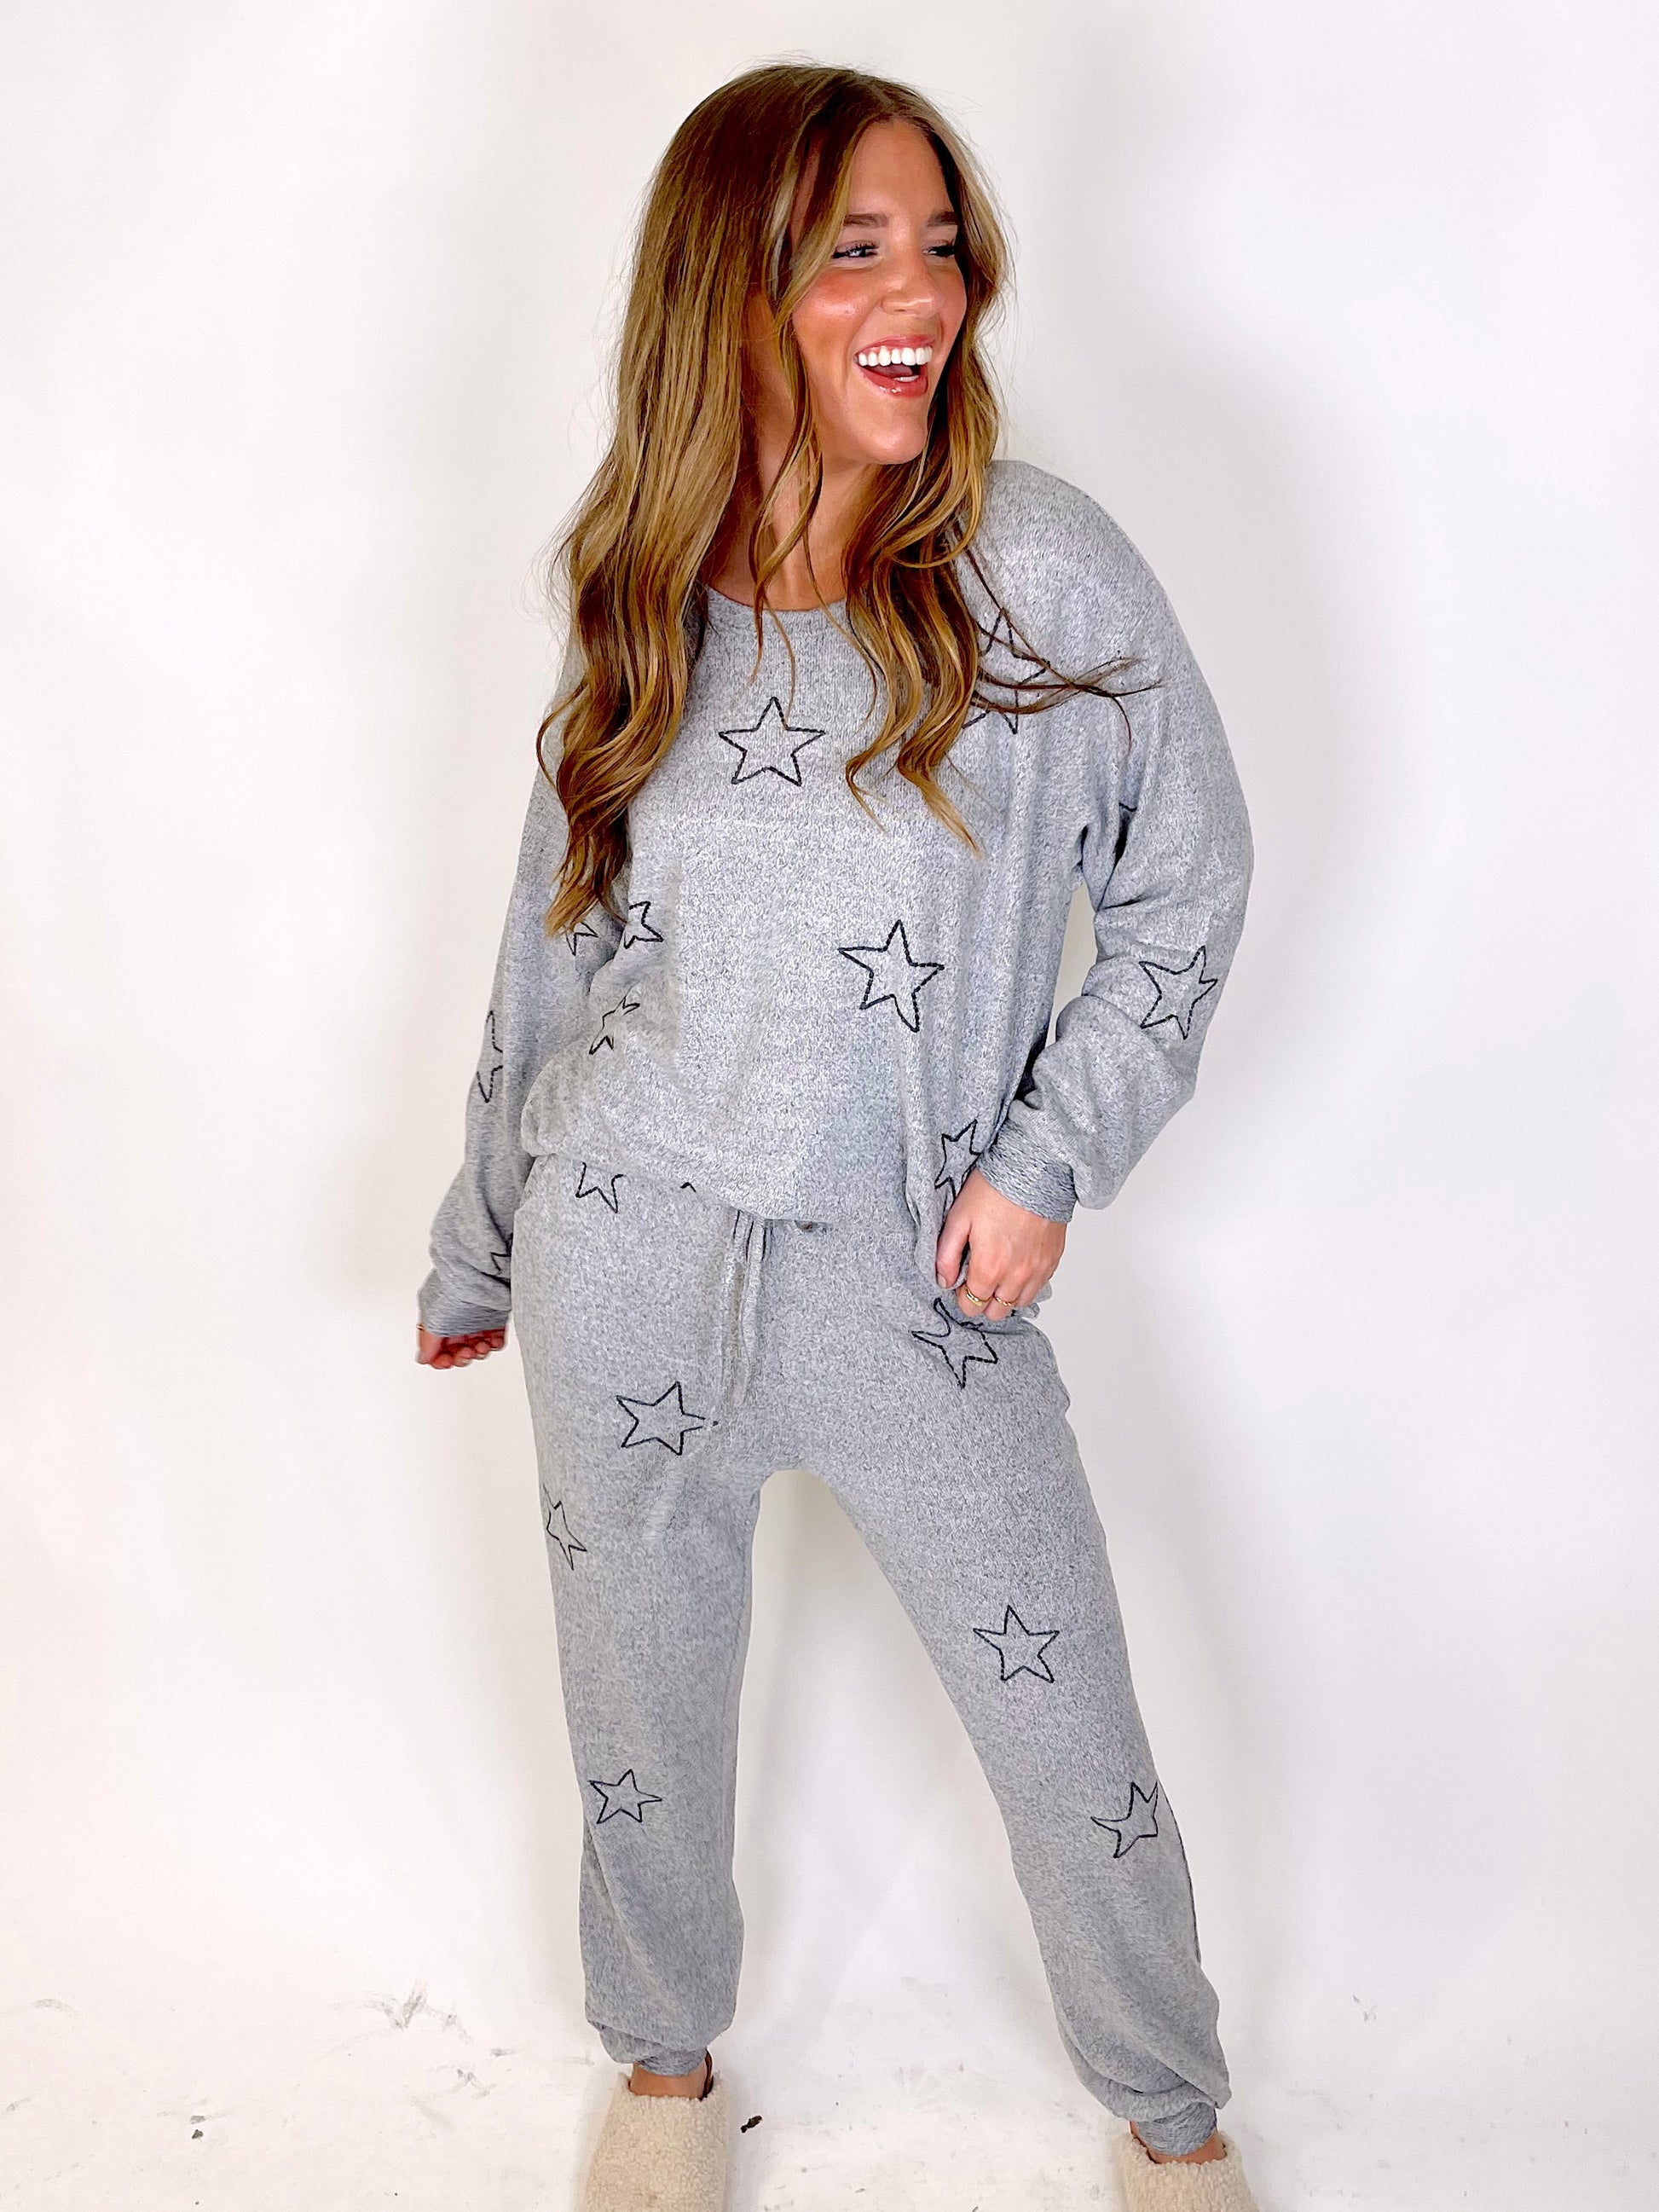 Shoot for the Stars Set | DOORBUSTER-Matching Set-Kori-The Village Shoppe, Women’s Fashion Boutique, Shop Online and In Store - Located in Muscle Shoals, AL.